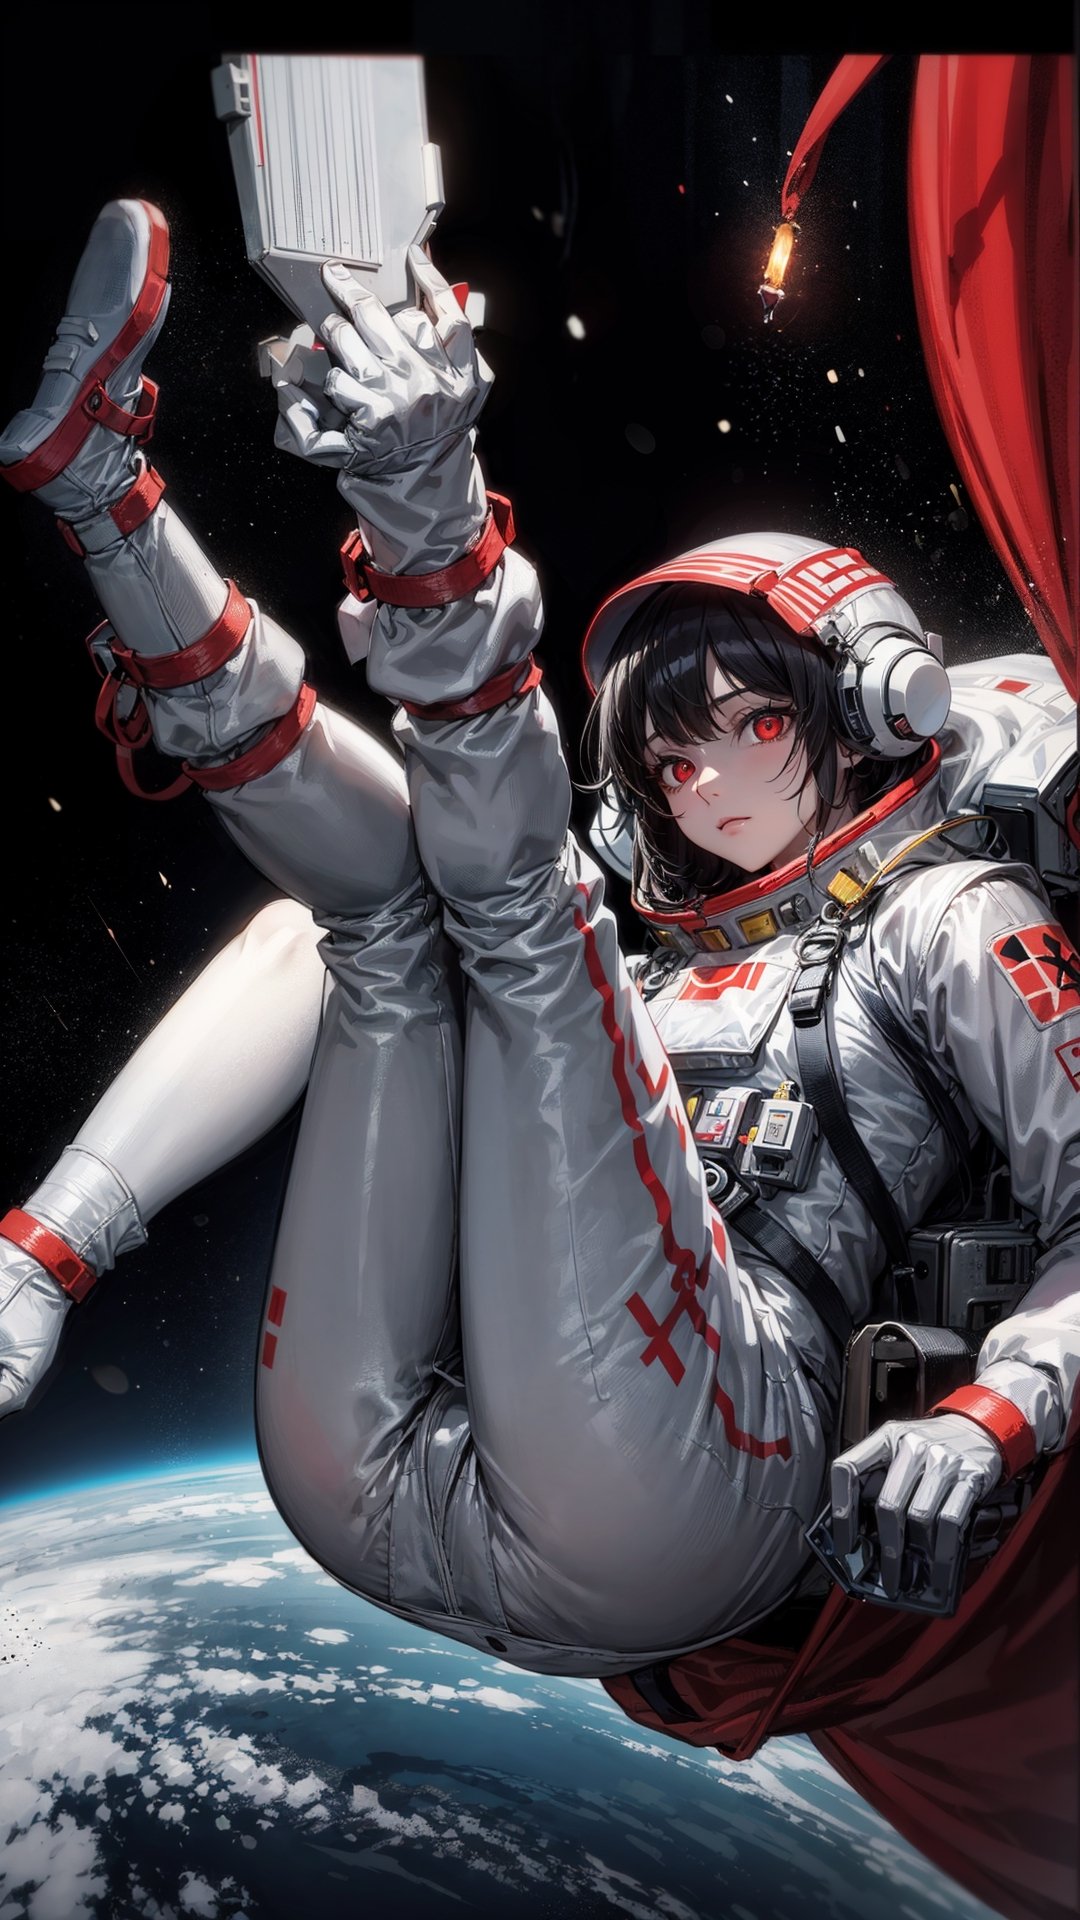 CCCPposter, sovietposter,Create a mesmerizing artwork of a captivating girl in a Soviet spacesuit floating gracefully in weightlessness, her red eyes and black hair contrasting with the monochrome background as she gently touches the Salyut space station, against the backdrop of a magnificent blue Earth and a brilliant red flag.